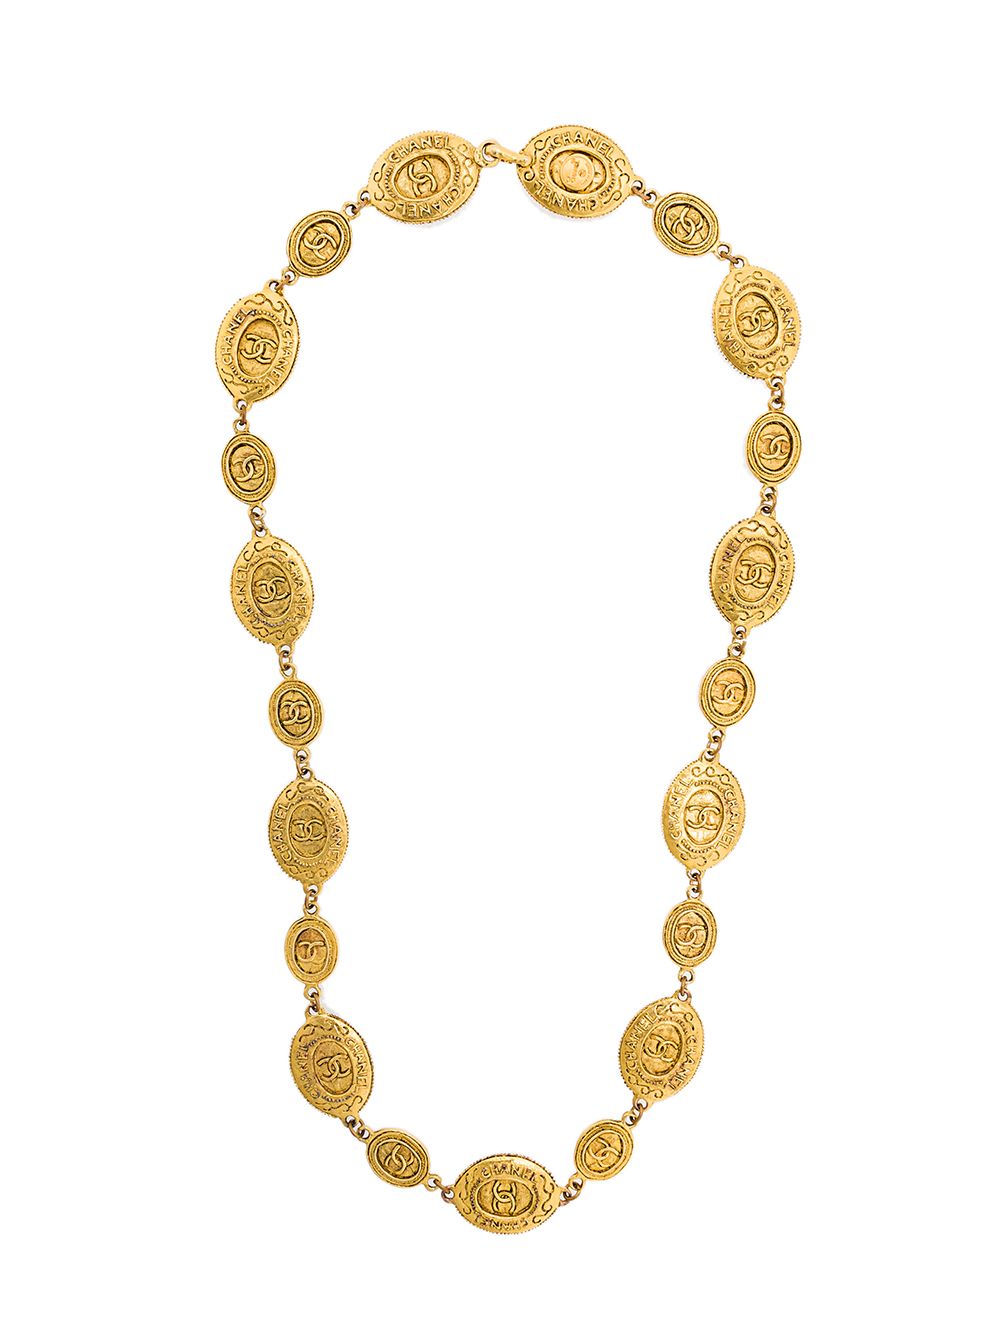 CHANEL Pre-Owned embossed medallions necklace